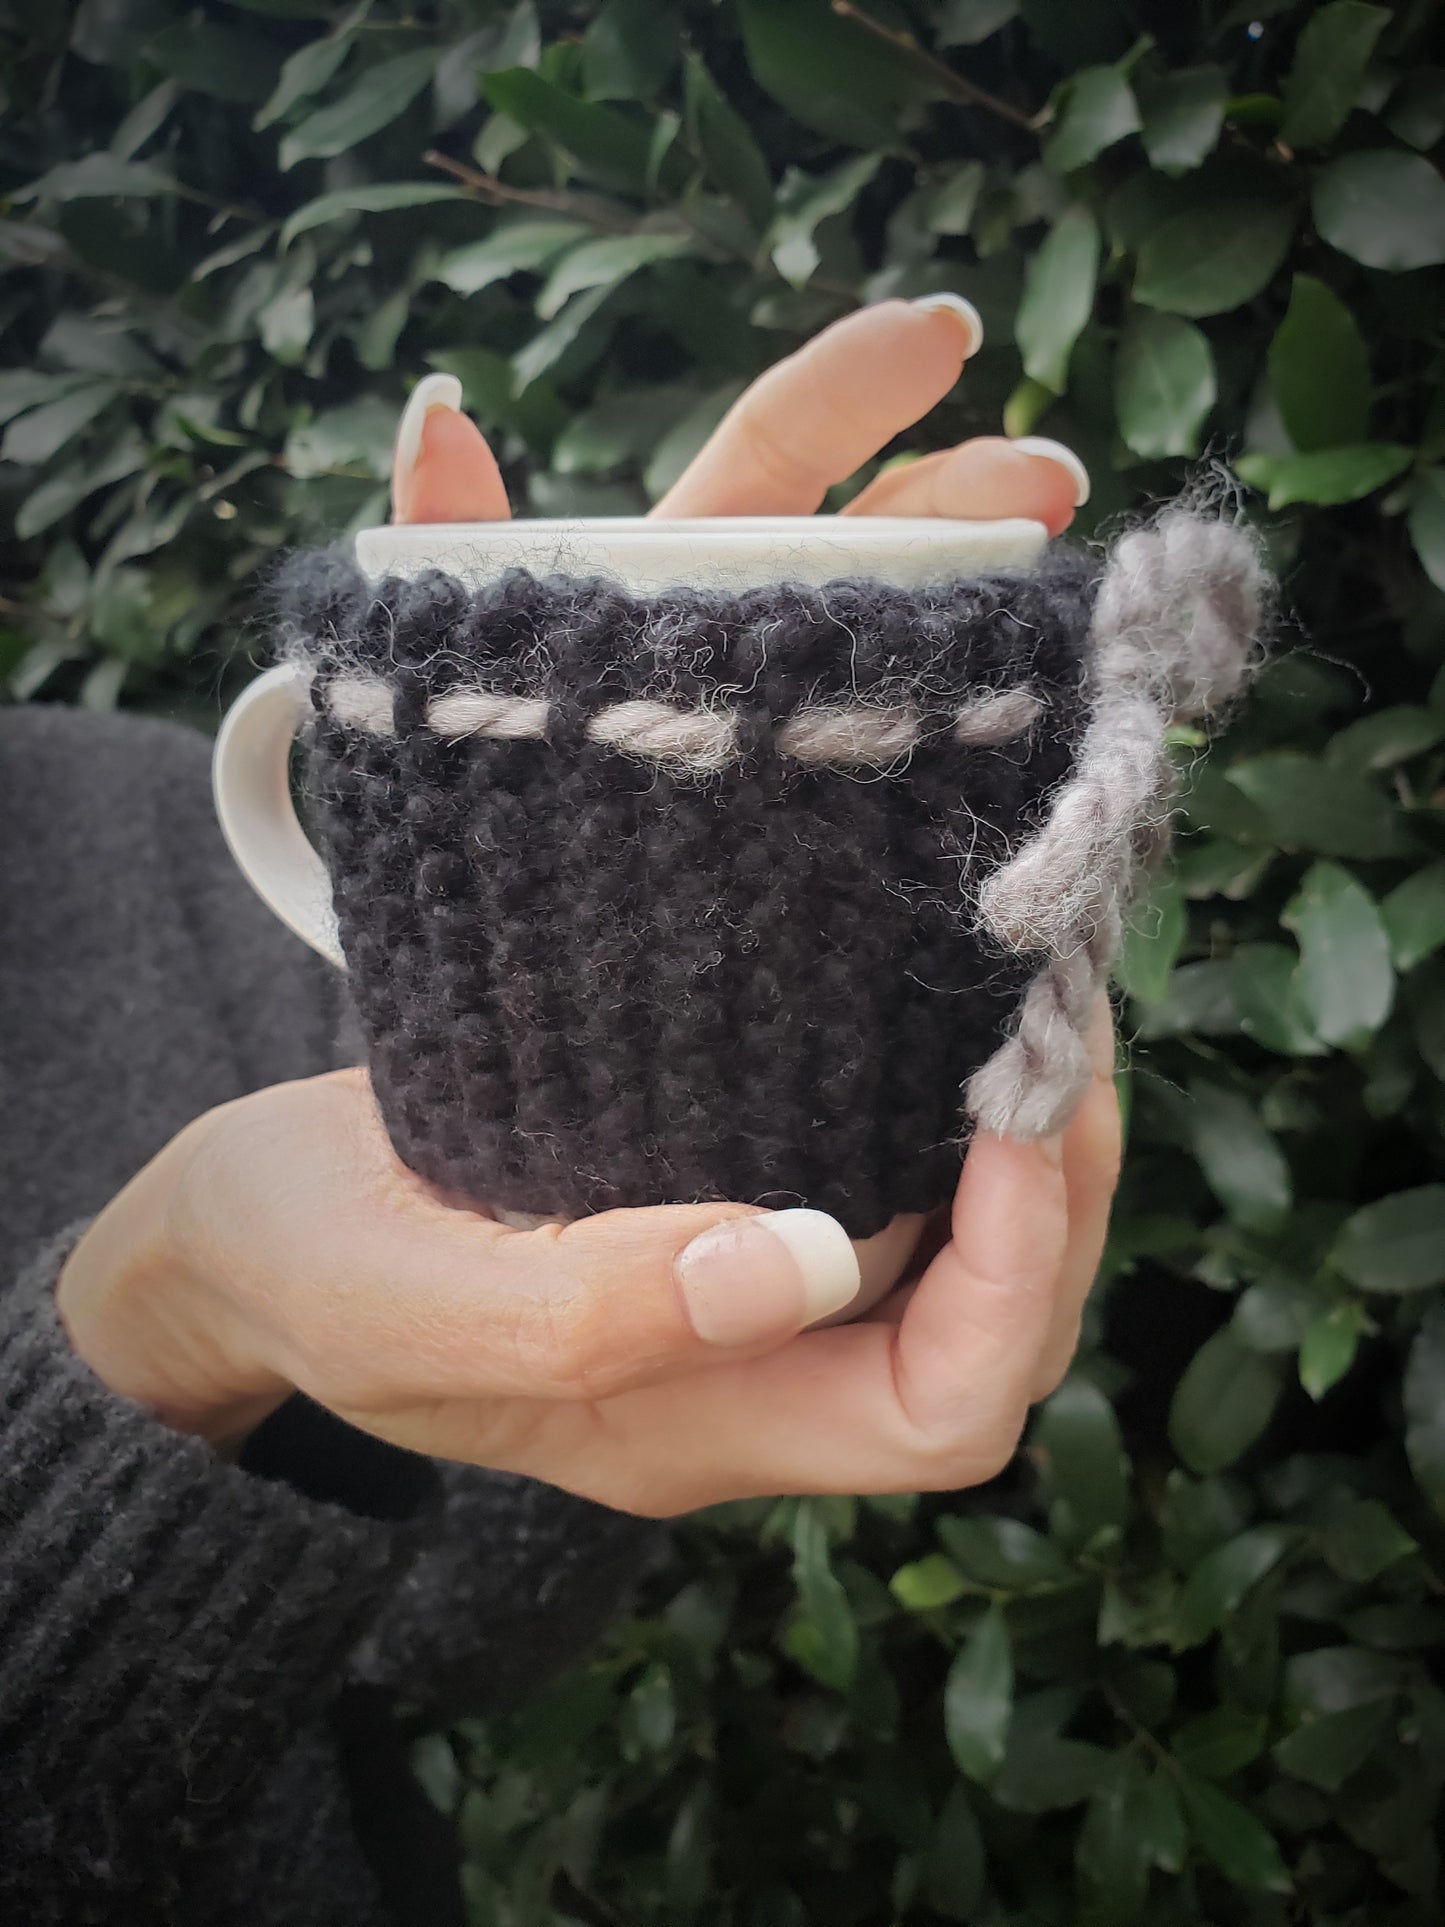 Handknit Mug Cozy with Bow and Buttons, Prototype